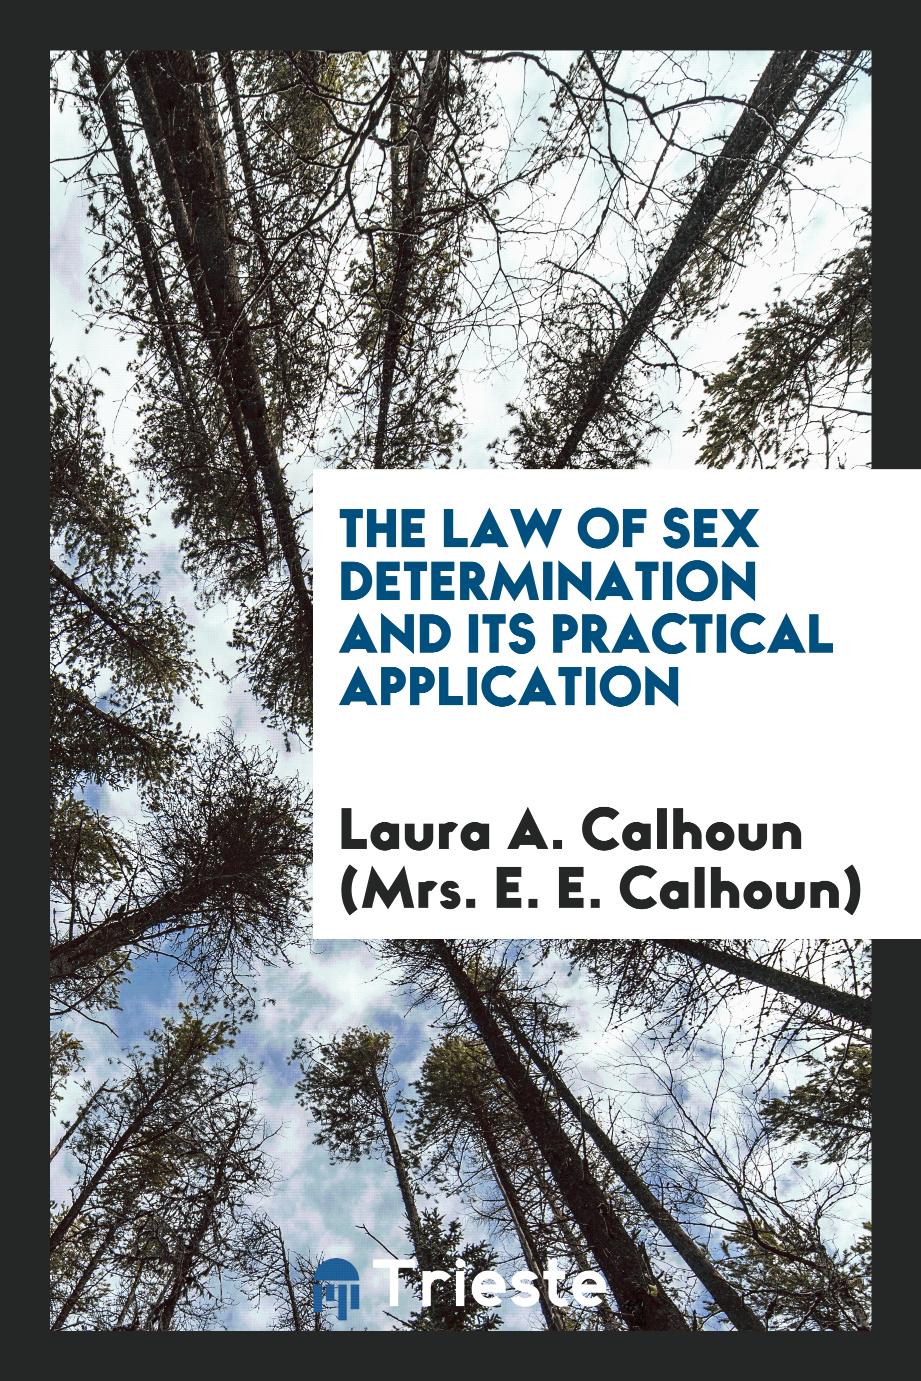 The Law of Sex Determination and Its Practical Application